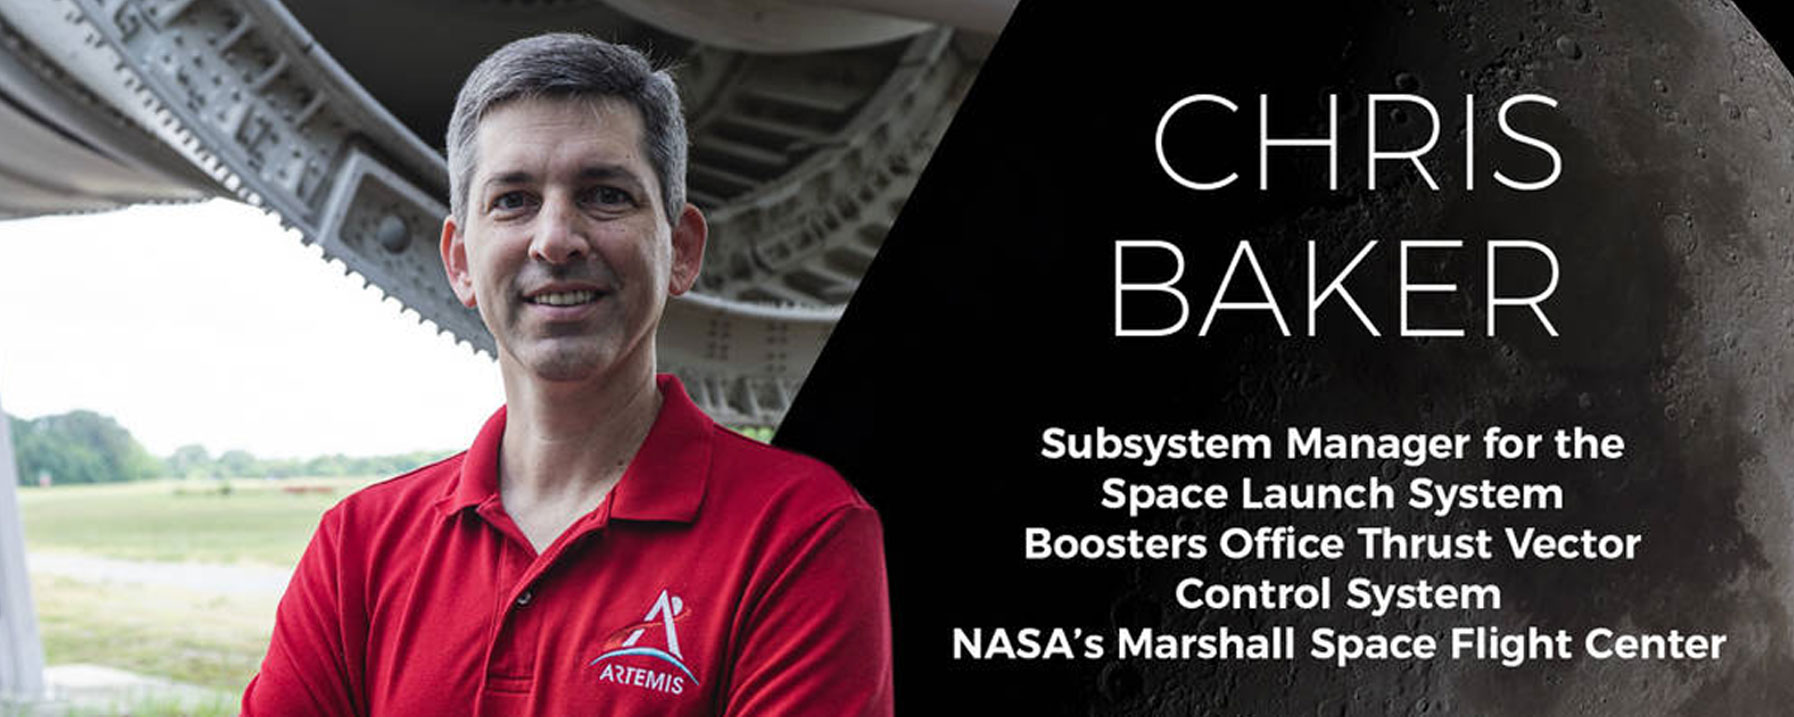 Photo of Chris Baker the Subsystem Manager for the Space Launch System Boosters Office Thrust Vector Control System at NASA's Marshall Space Flight Center.